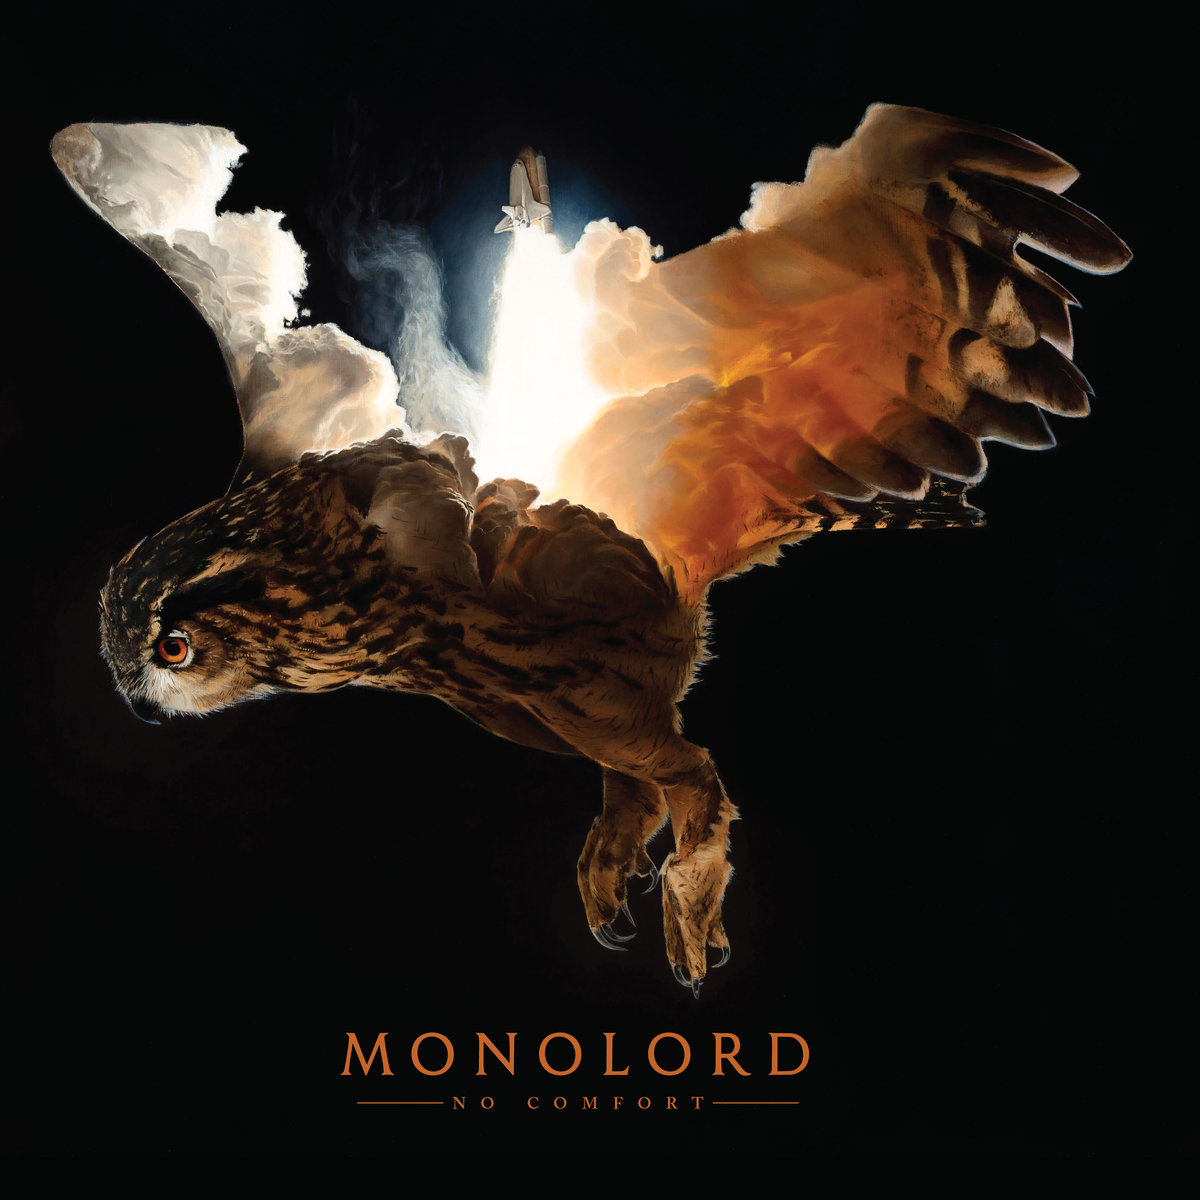 'No Comfort' by Monolord album review by Adam Williams for Northern Transmissions